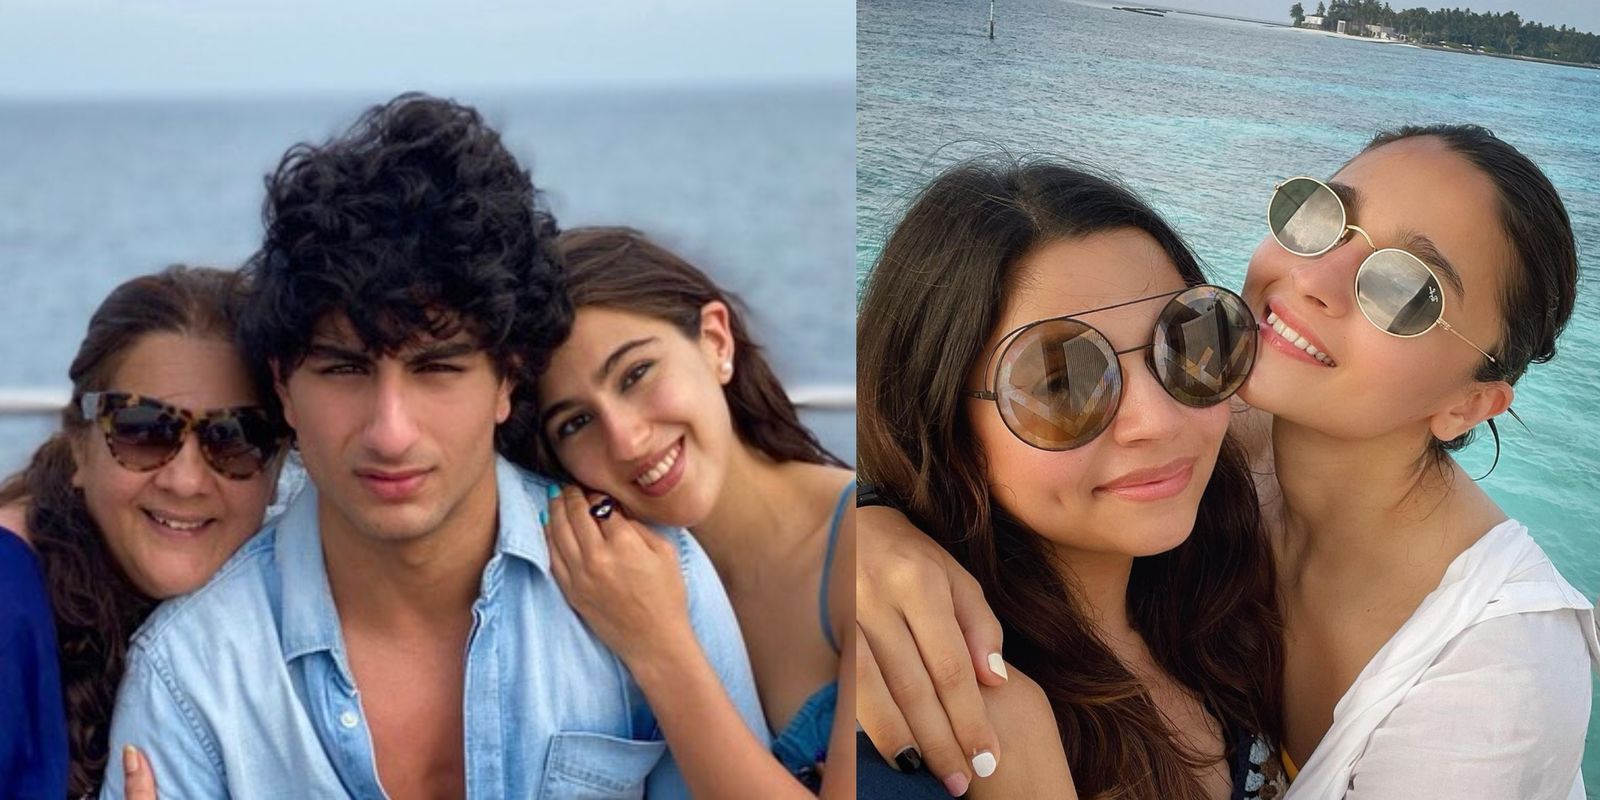 Sara Showers Mommy Amrita With Love On Her Birthday; Alia Spends Quality Time With Her Girls In Maldives